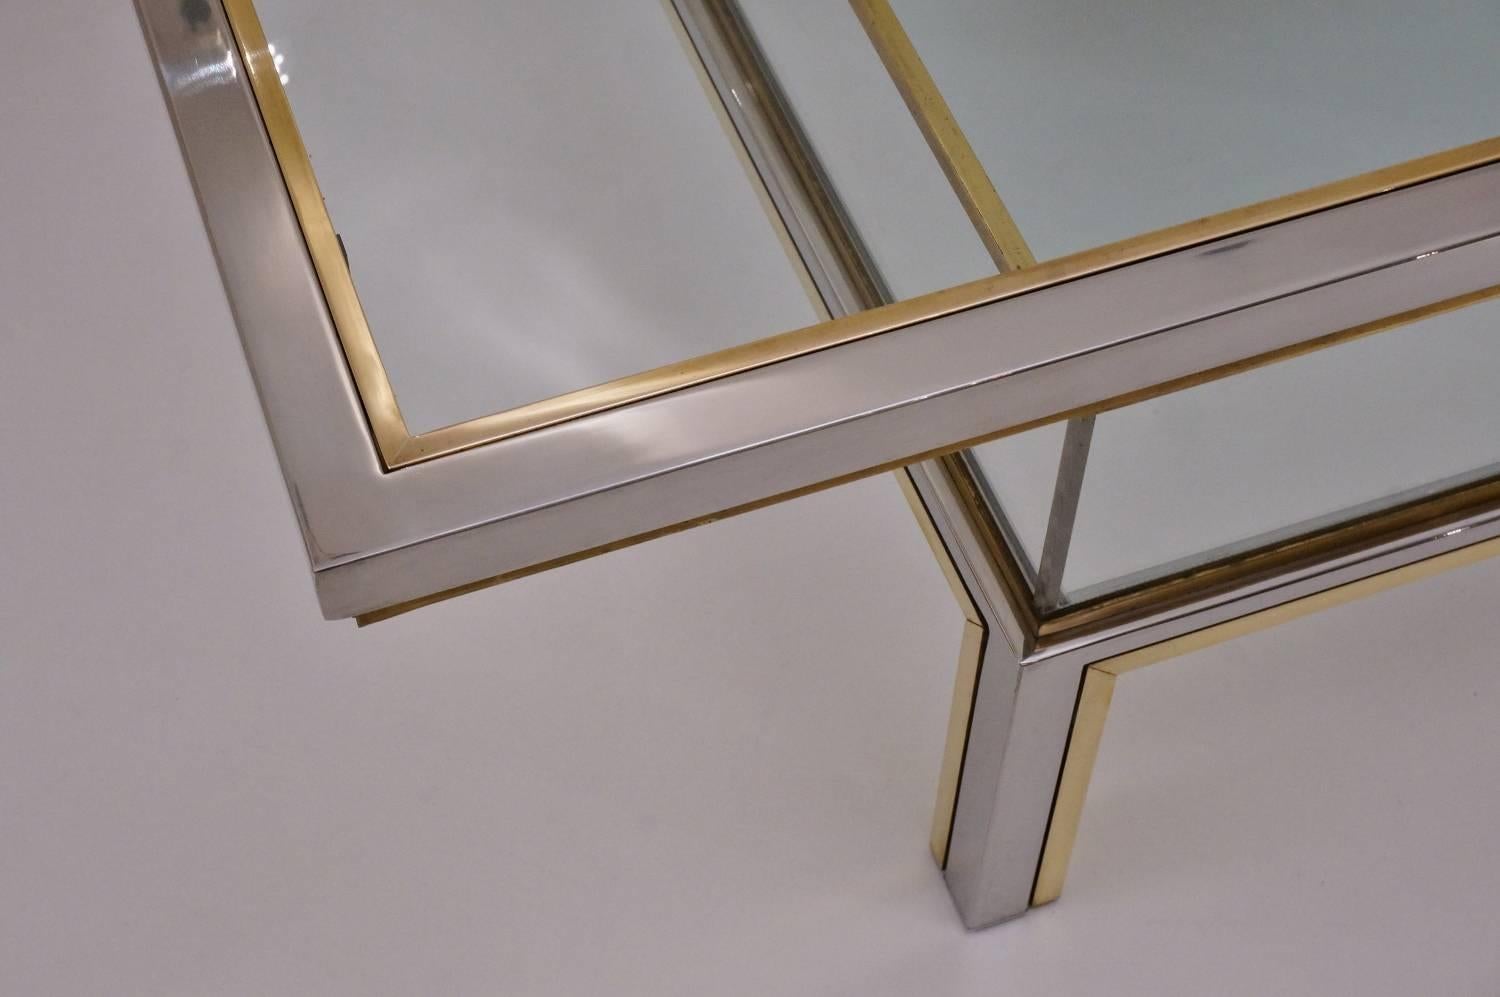 Romeo Rega signed vintage coffee table with a sliding top and display shelf in brass, chrome, Lucite and glass, circa 1970s, Italian.

Thoroughly cleaned respecting the vintage patina and ready to use.

This generous sized square coffee table by